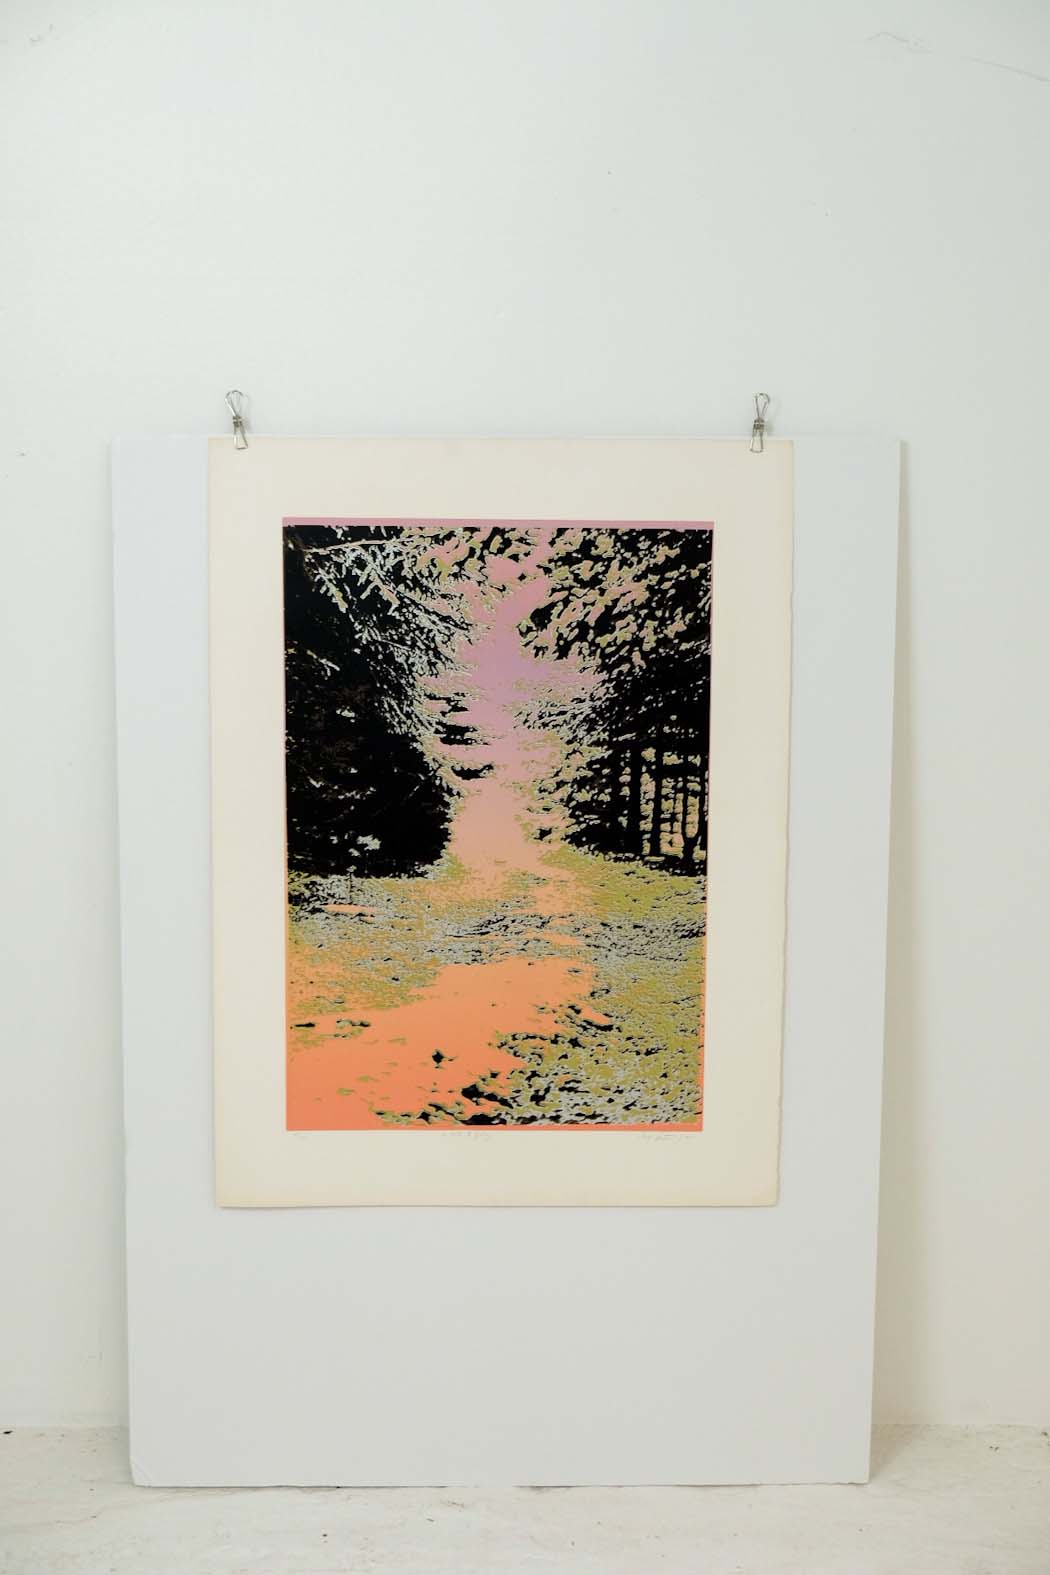 Max Epstein "A Path to Glory" Signed Screenprint